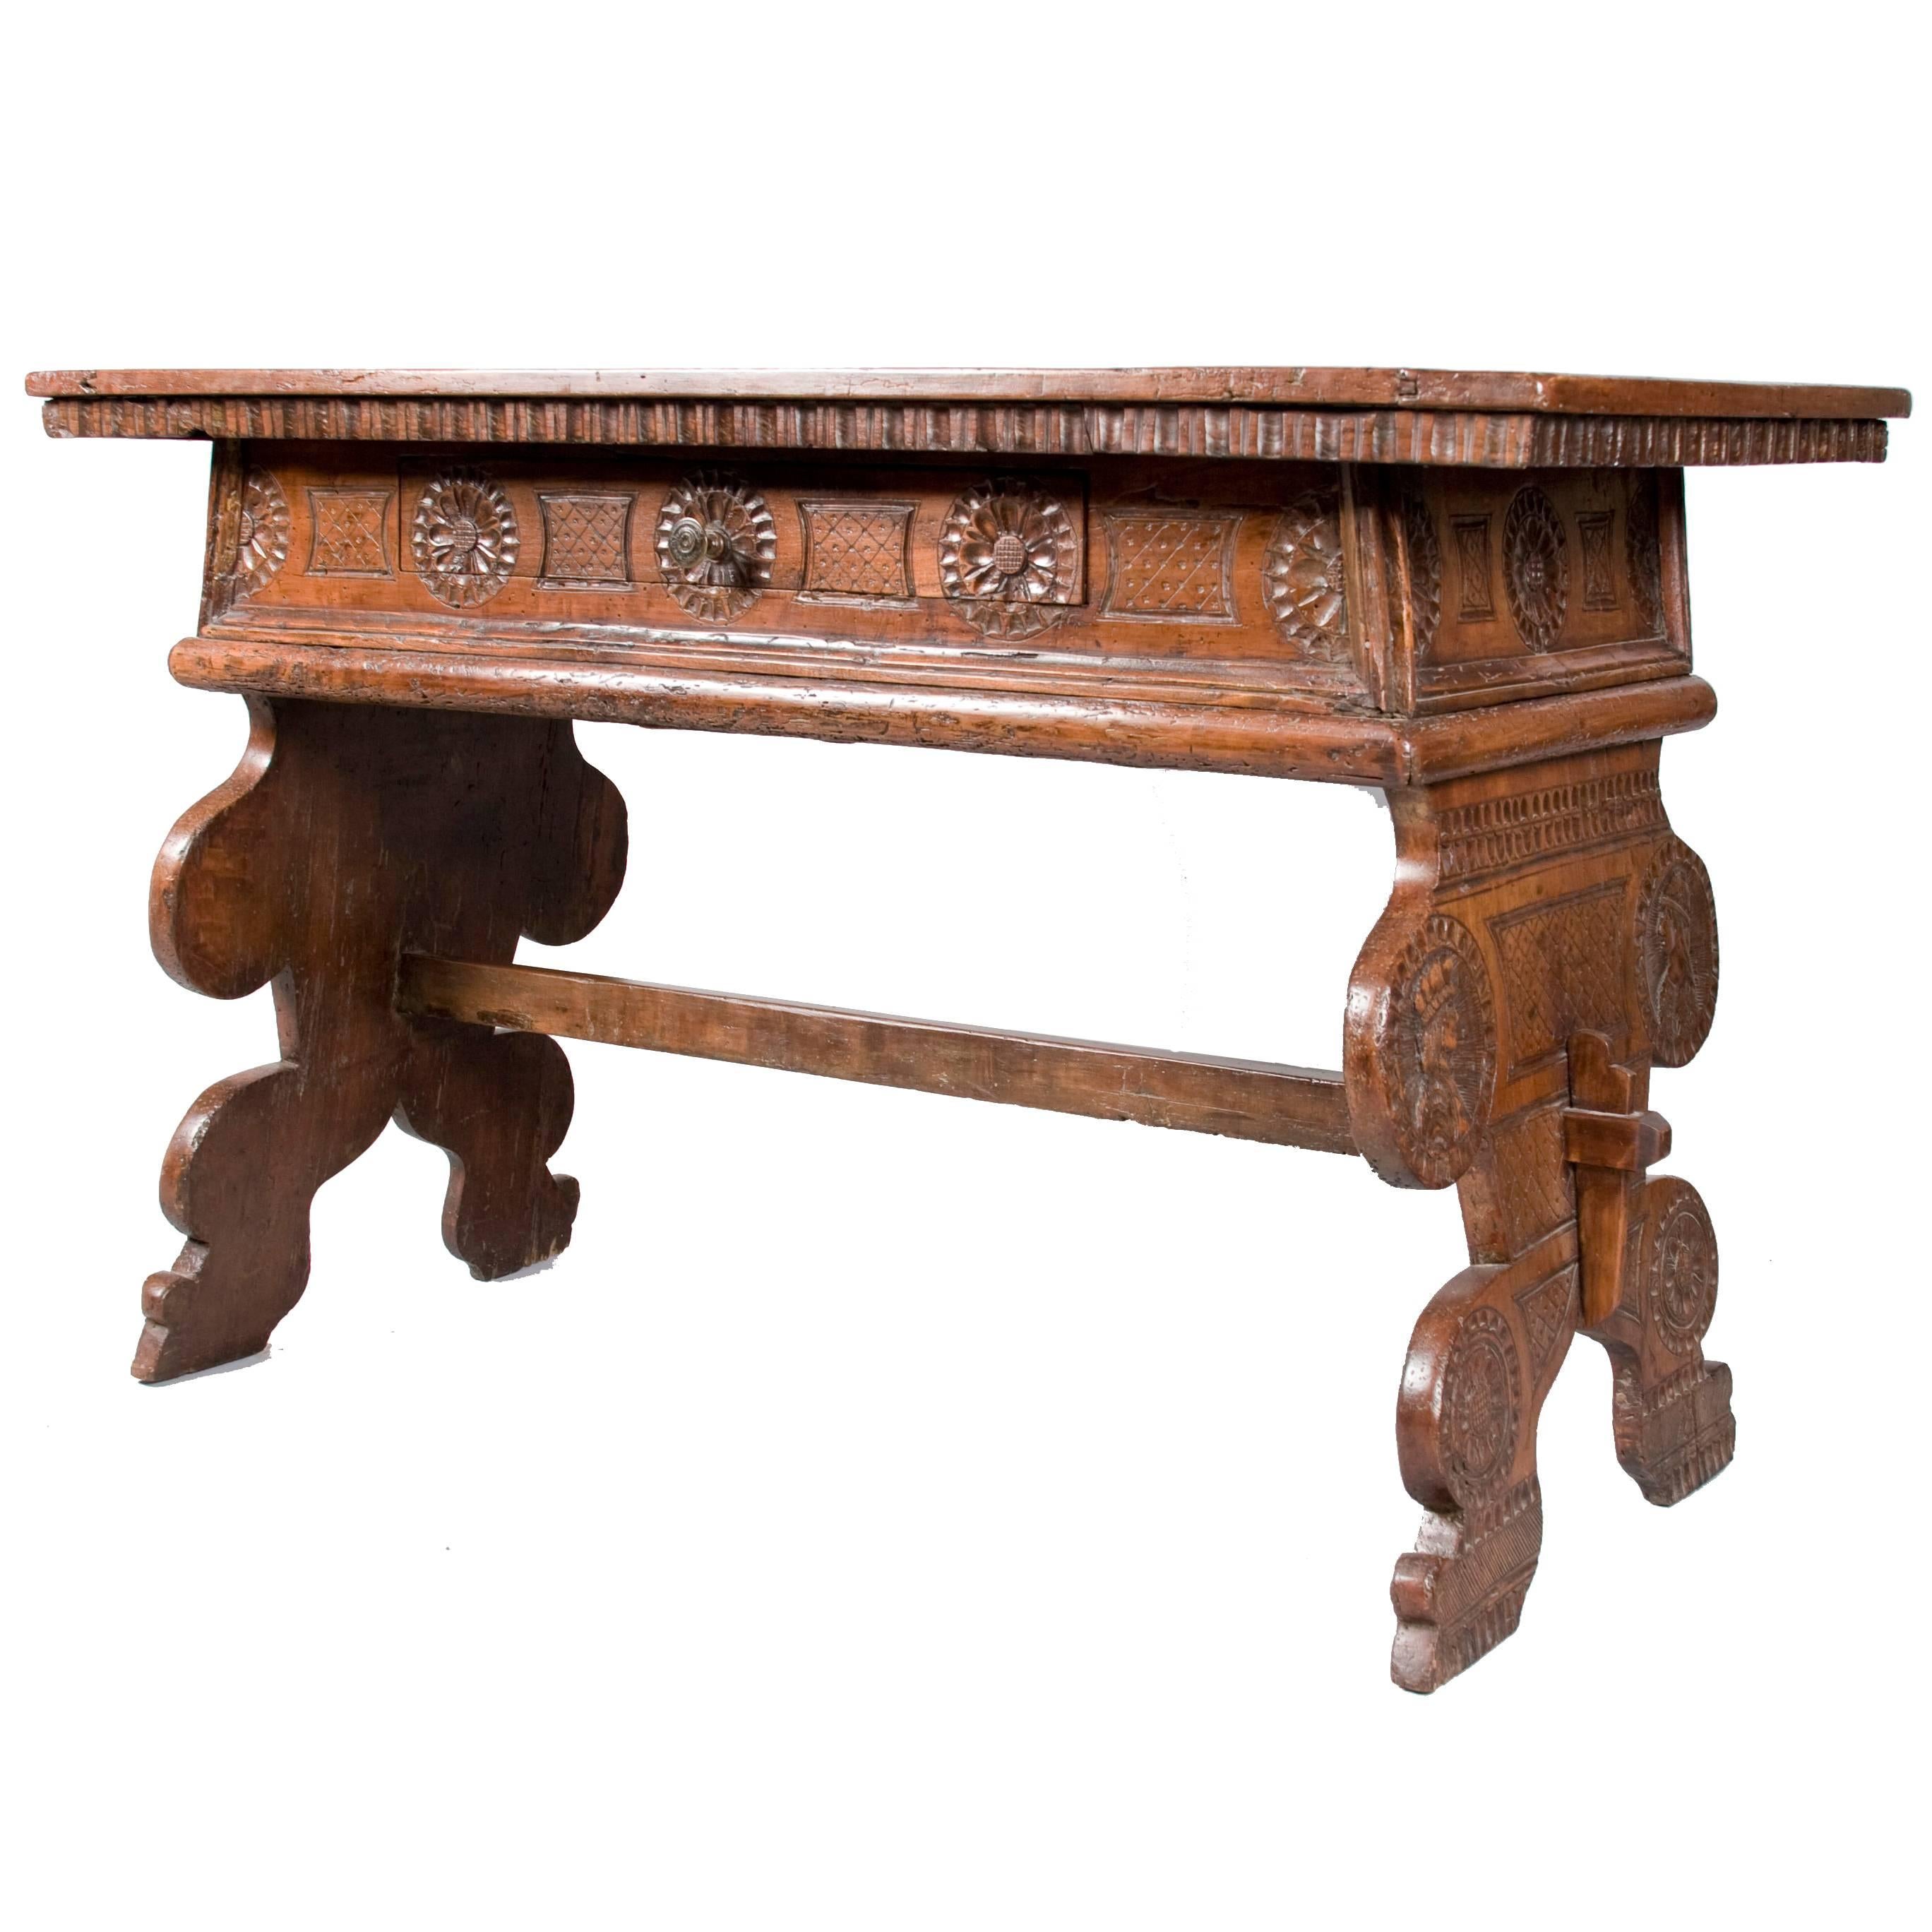 17th Cent. Portugese Chip Carved Desk, w. Portraits of Royalty on top and sides